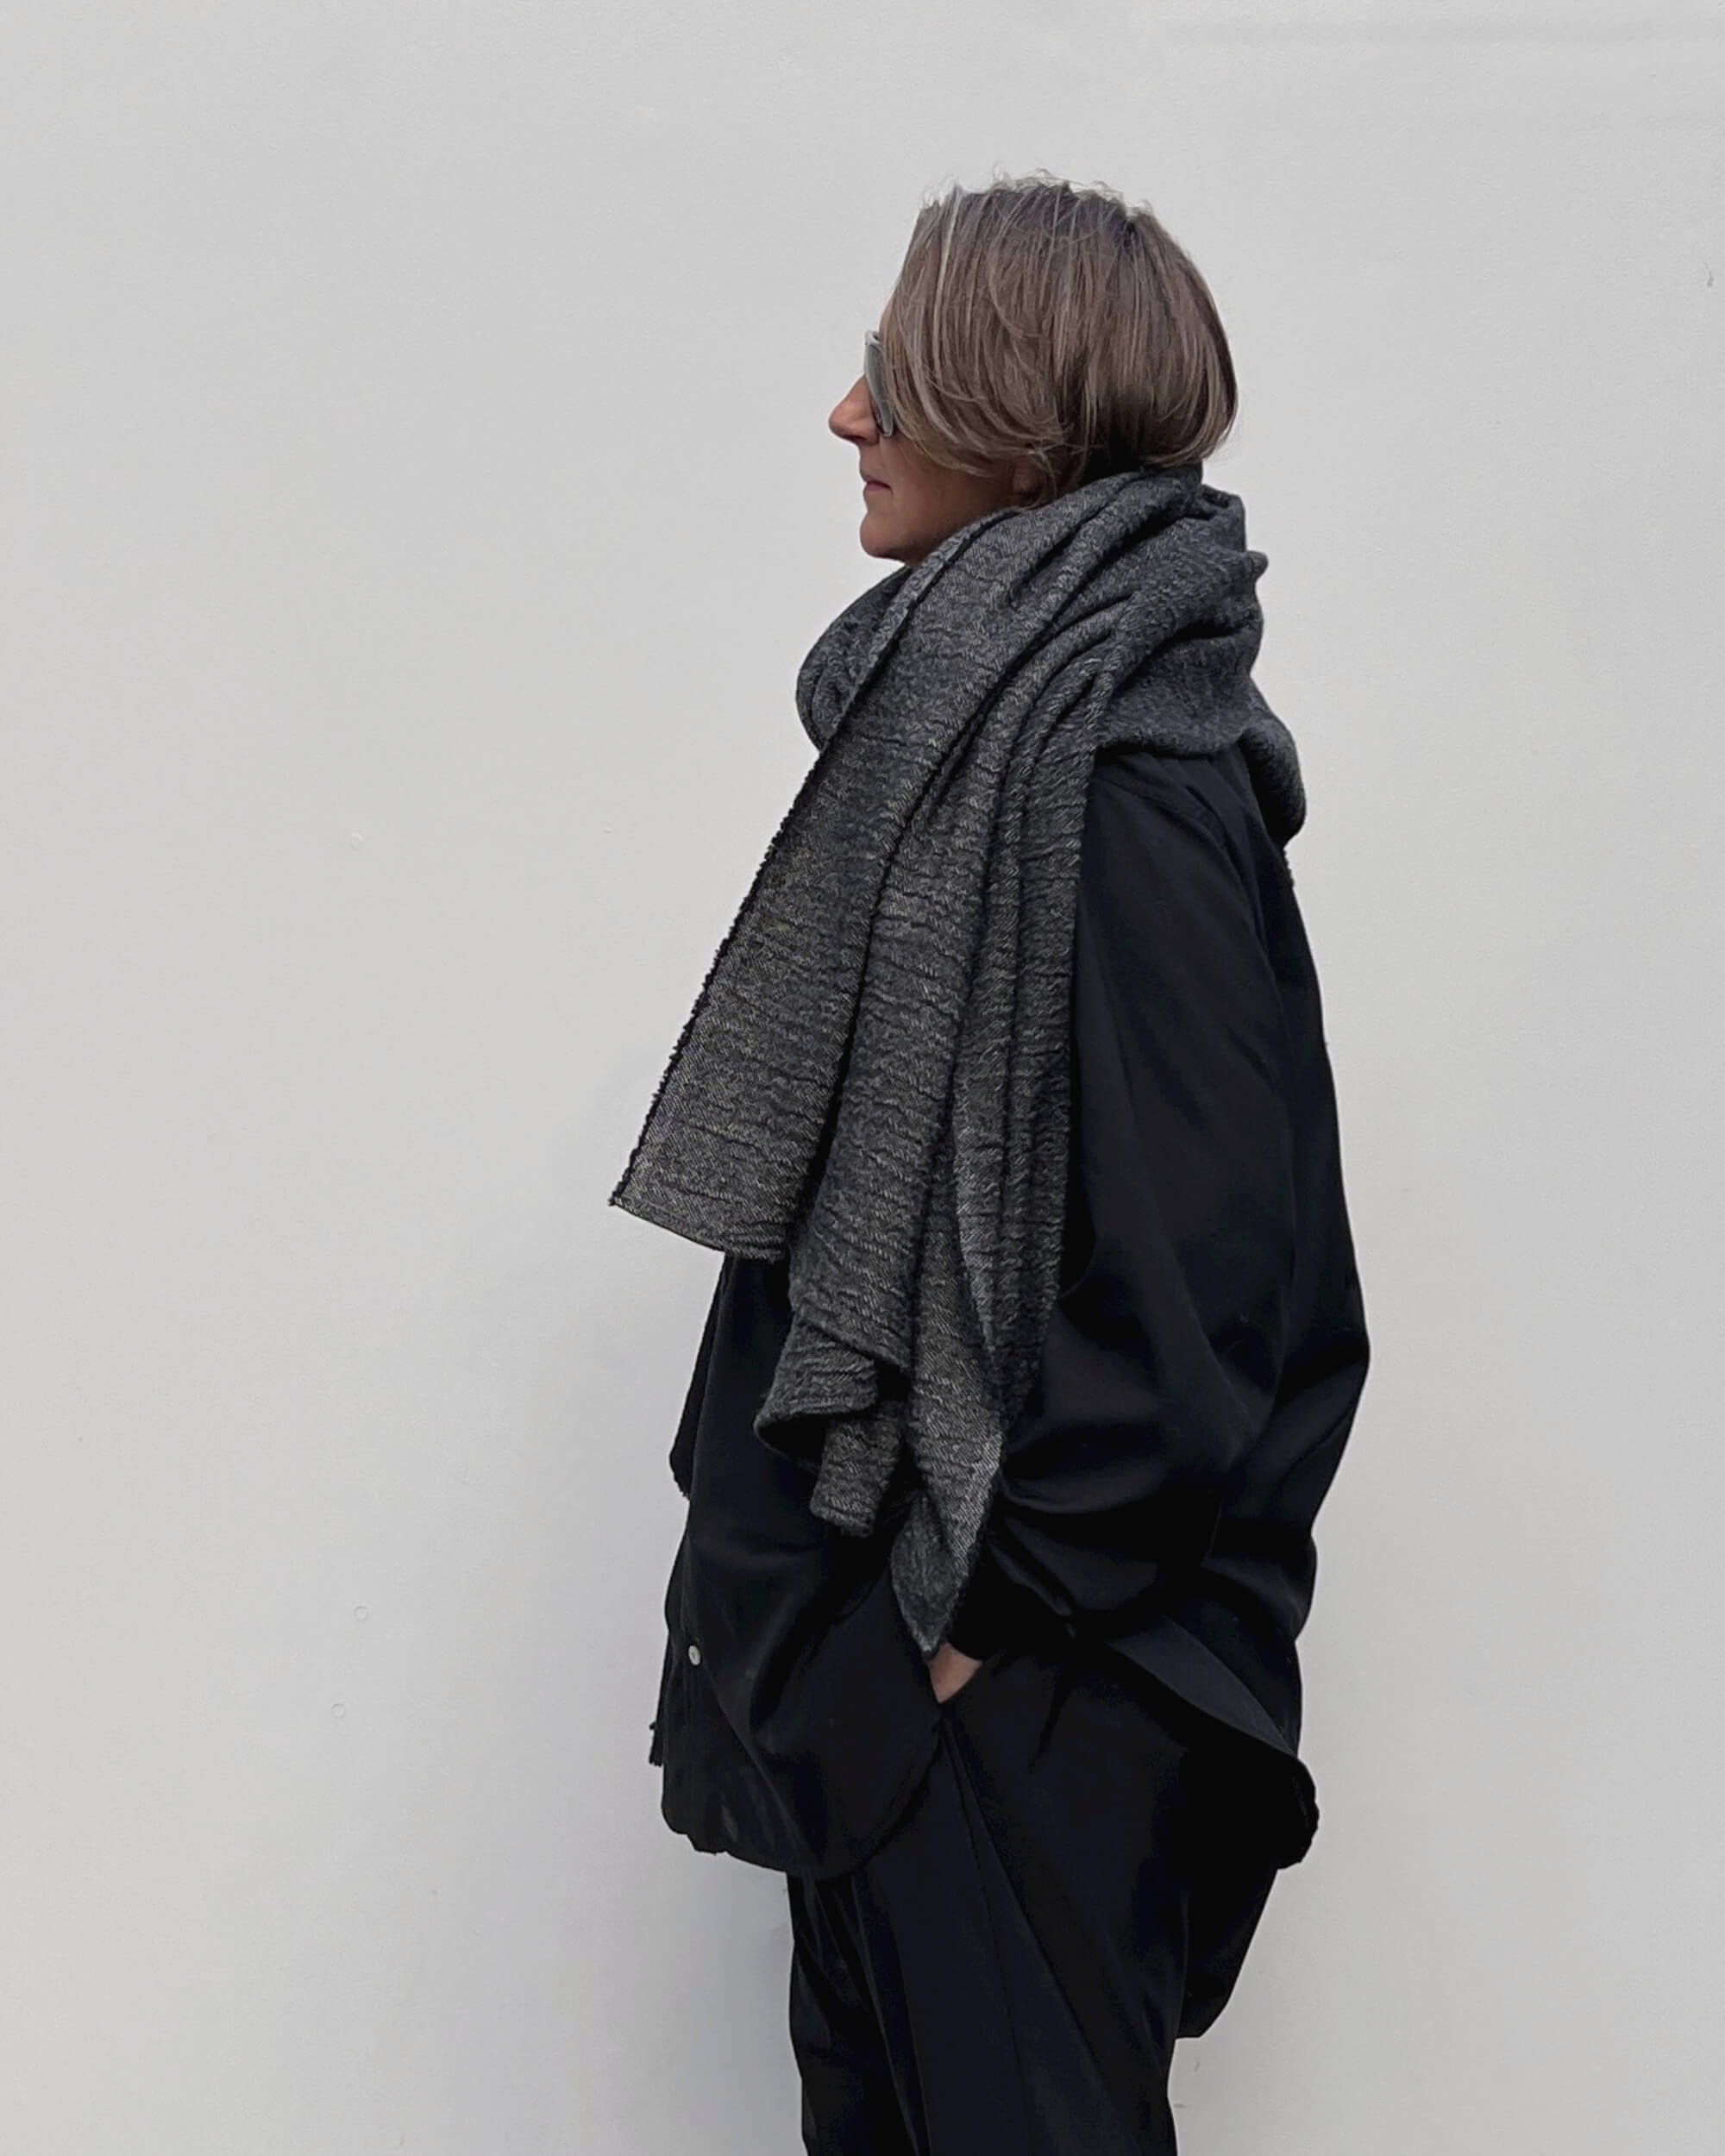 woollen chapter scarf, designed by LJ struthers